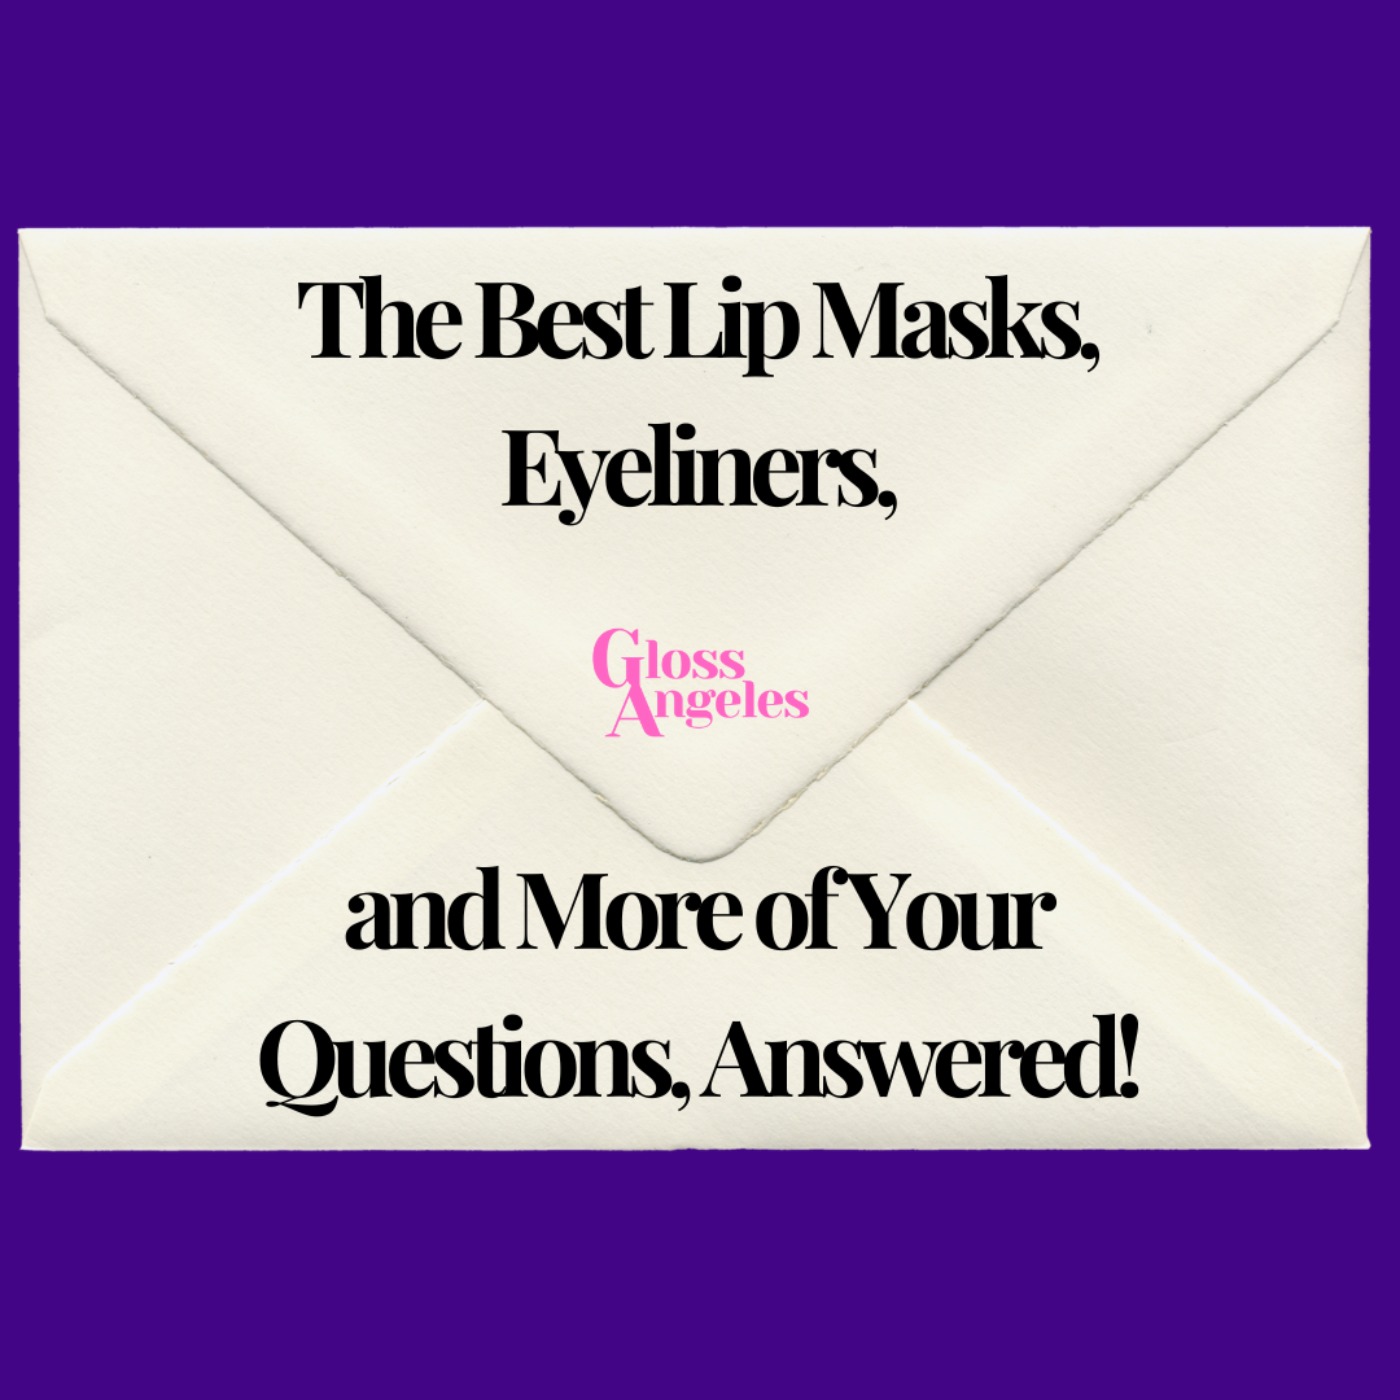 The Best Lip Masks, Eyeliners, and More of Your Questions, Answered!